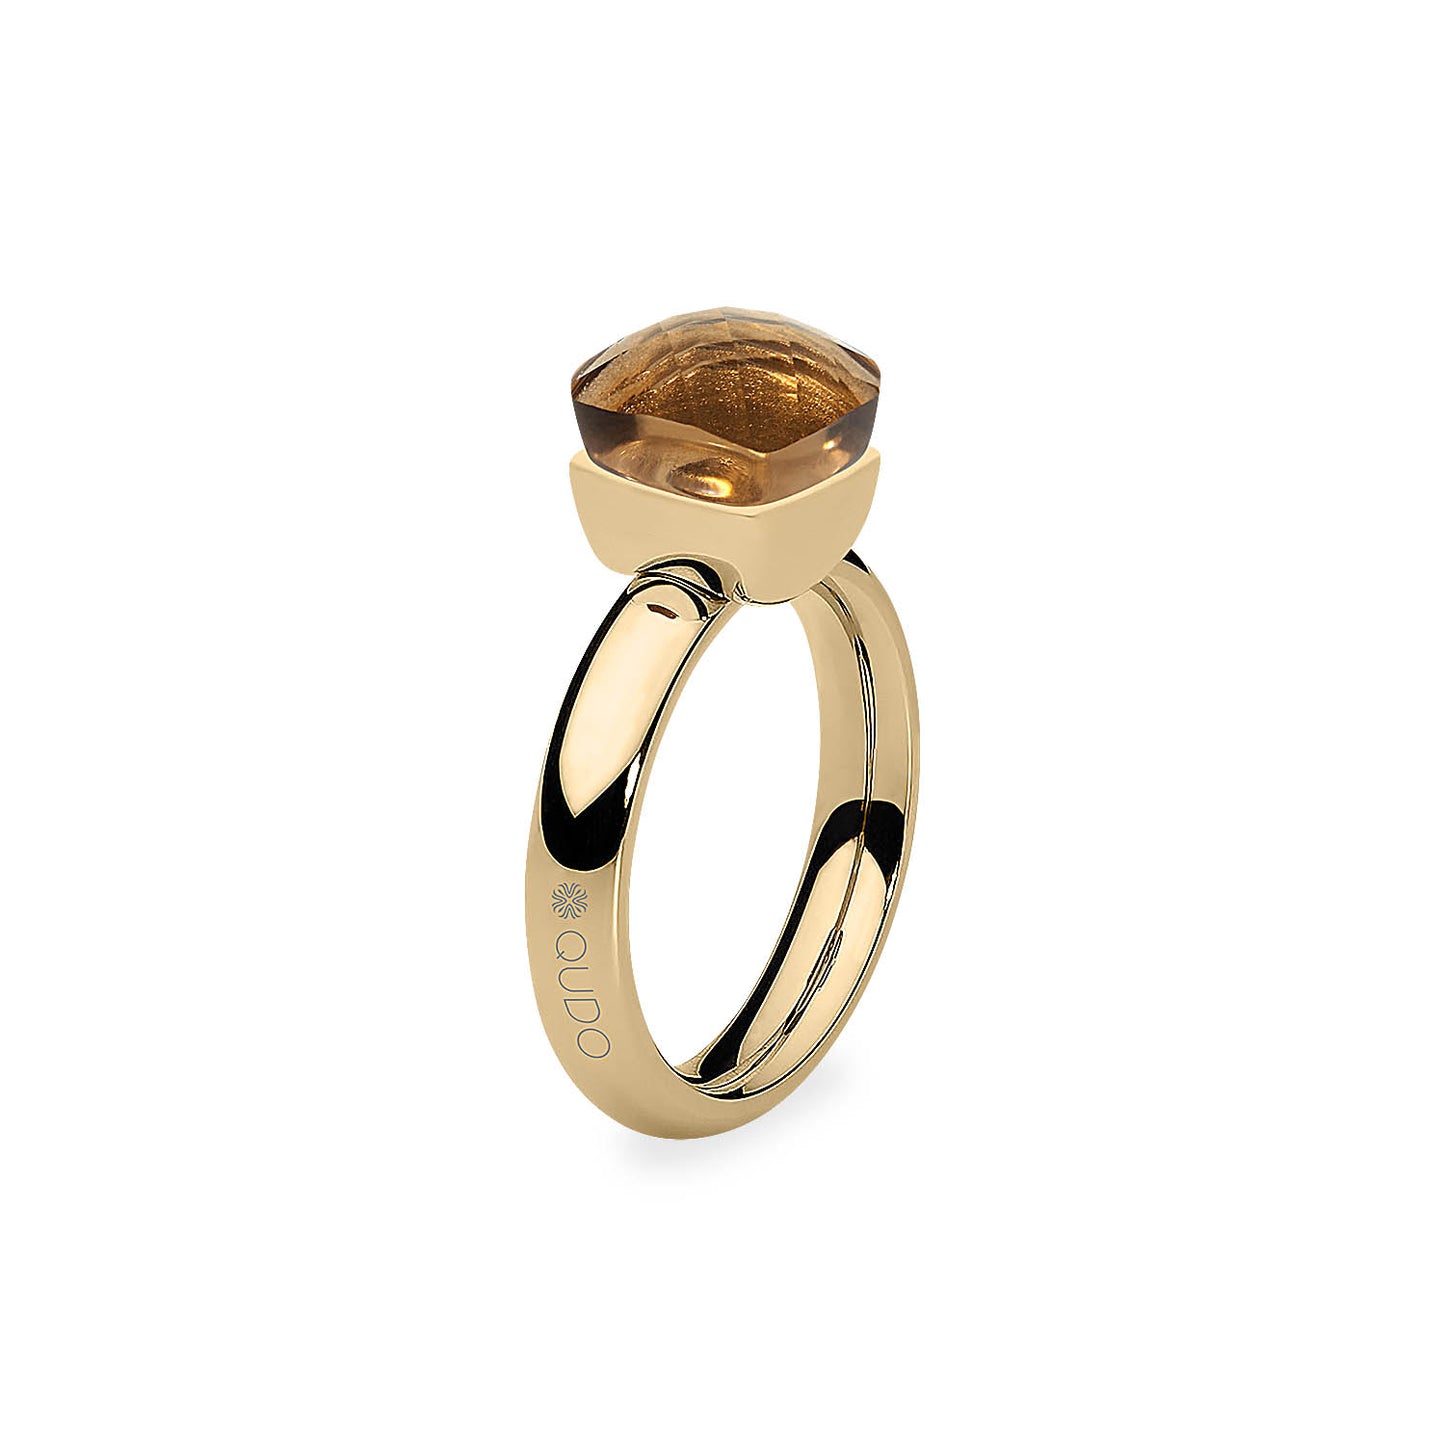 Firenze Ring in Gold - Smoked Topaz